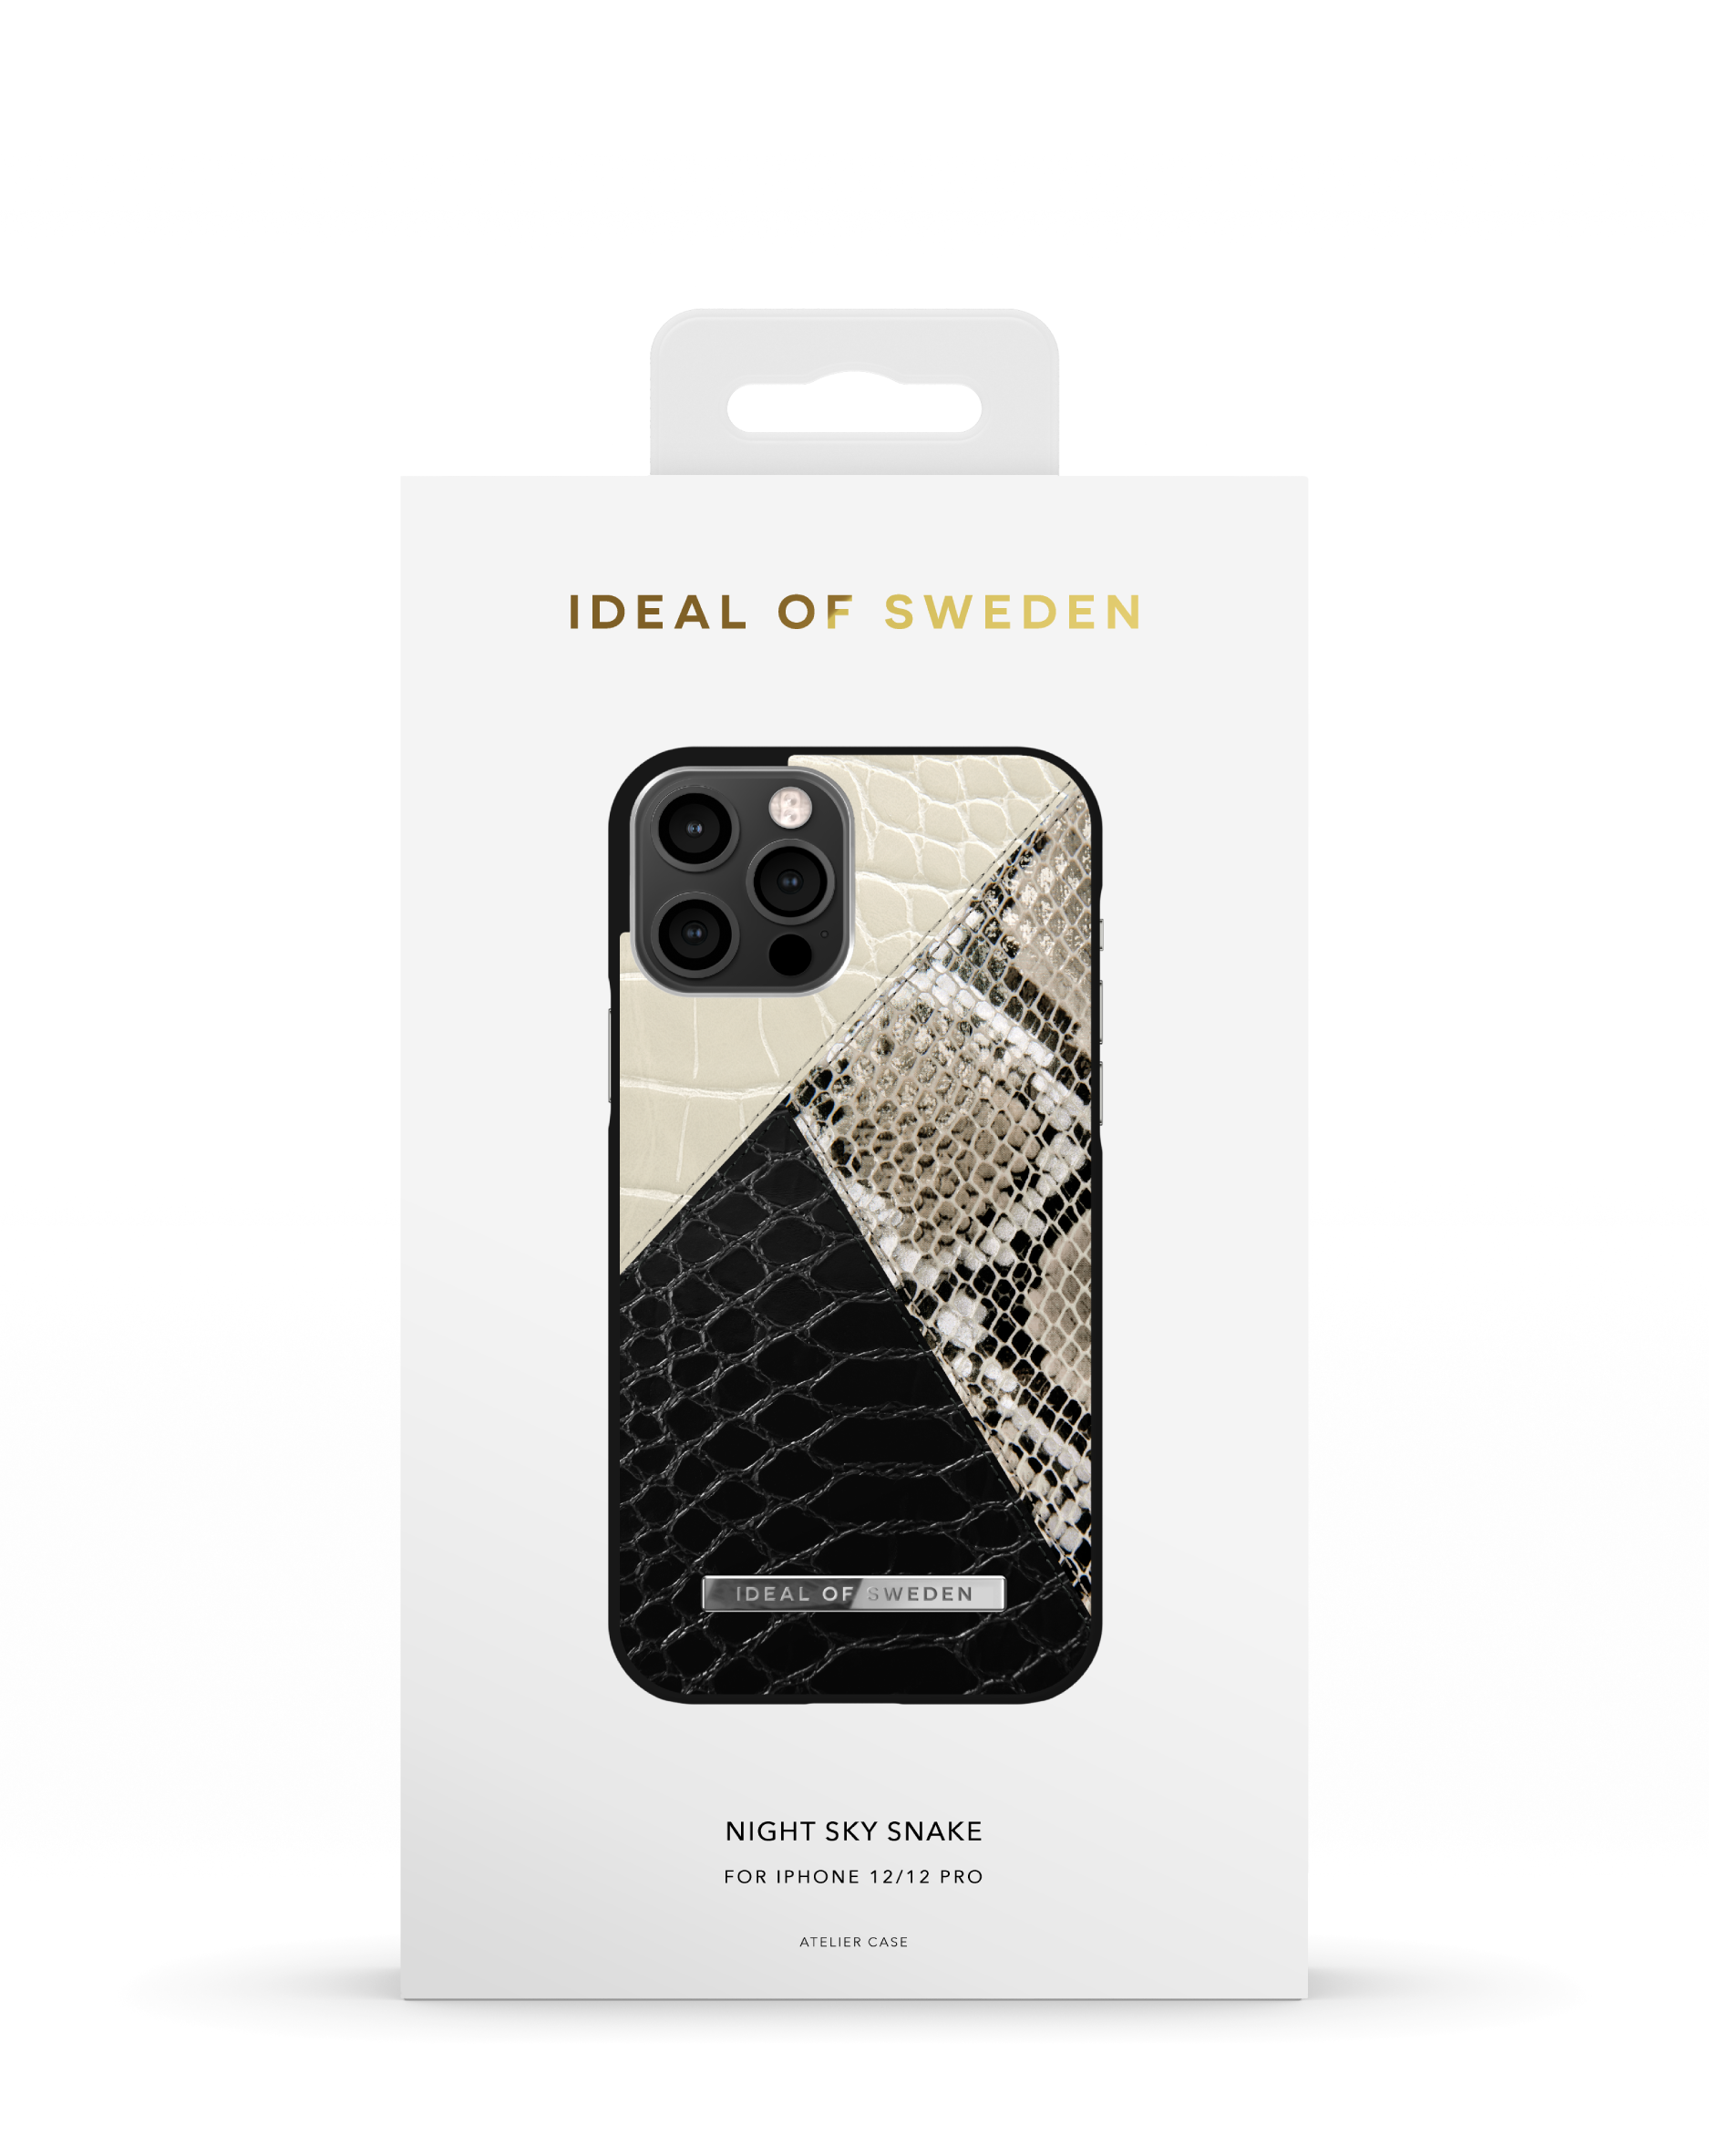 12, Apple IDACSS21-I2061-271, IDEAL Pro, Apple, Sky Apple Snake SWEDEN Night iPhone OF 12 Backcover, iPhone